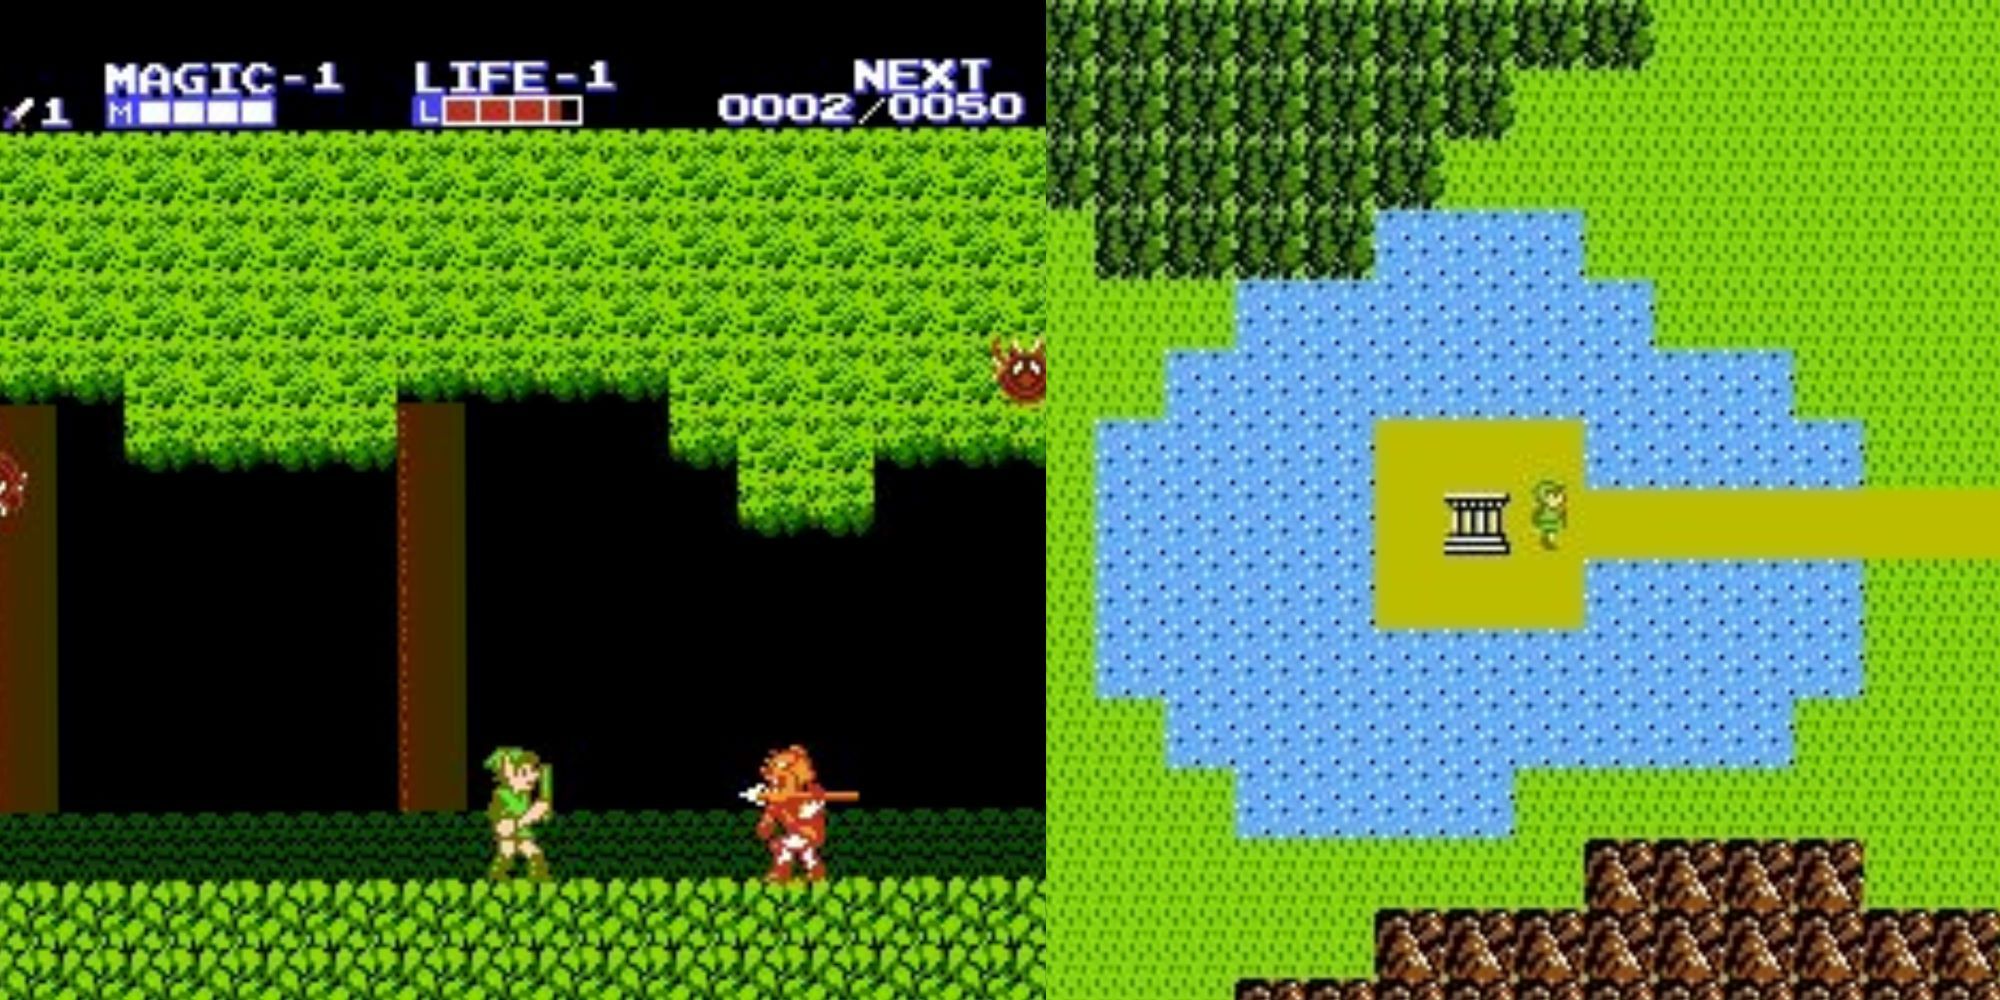 2 Screenshots from Zelda 2: Left - Link in a forest fighting a Moblin, Right - Link on the overworld 